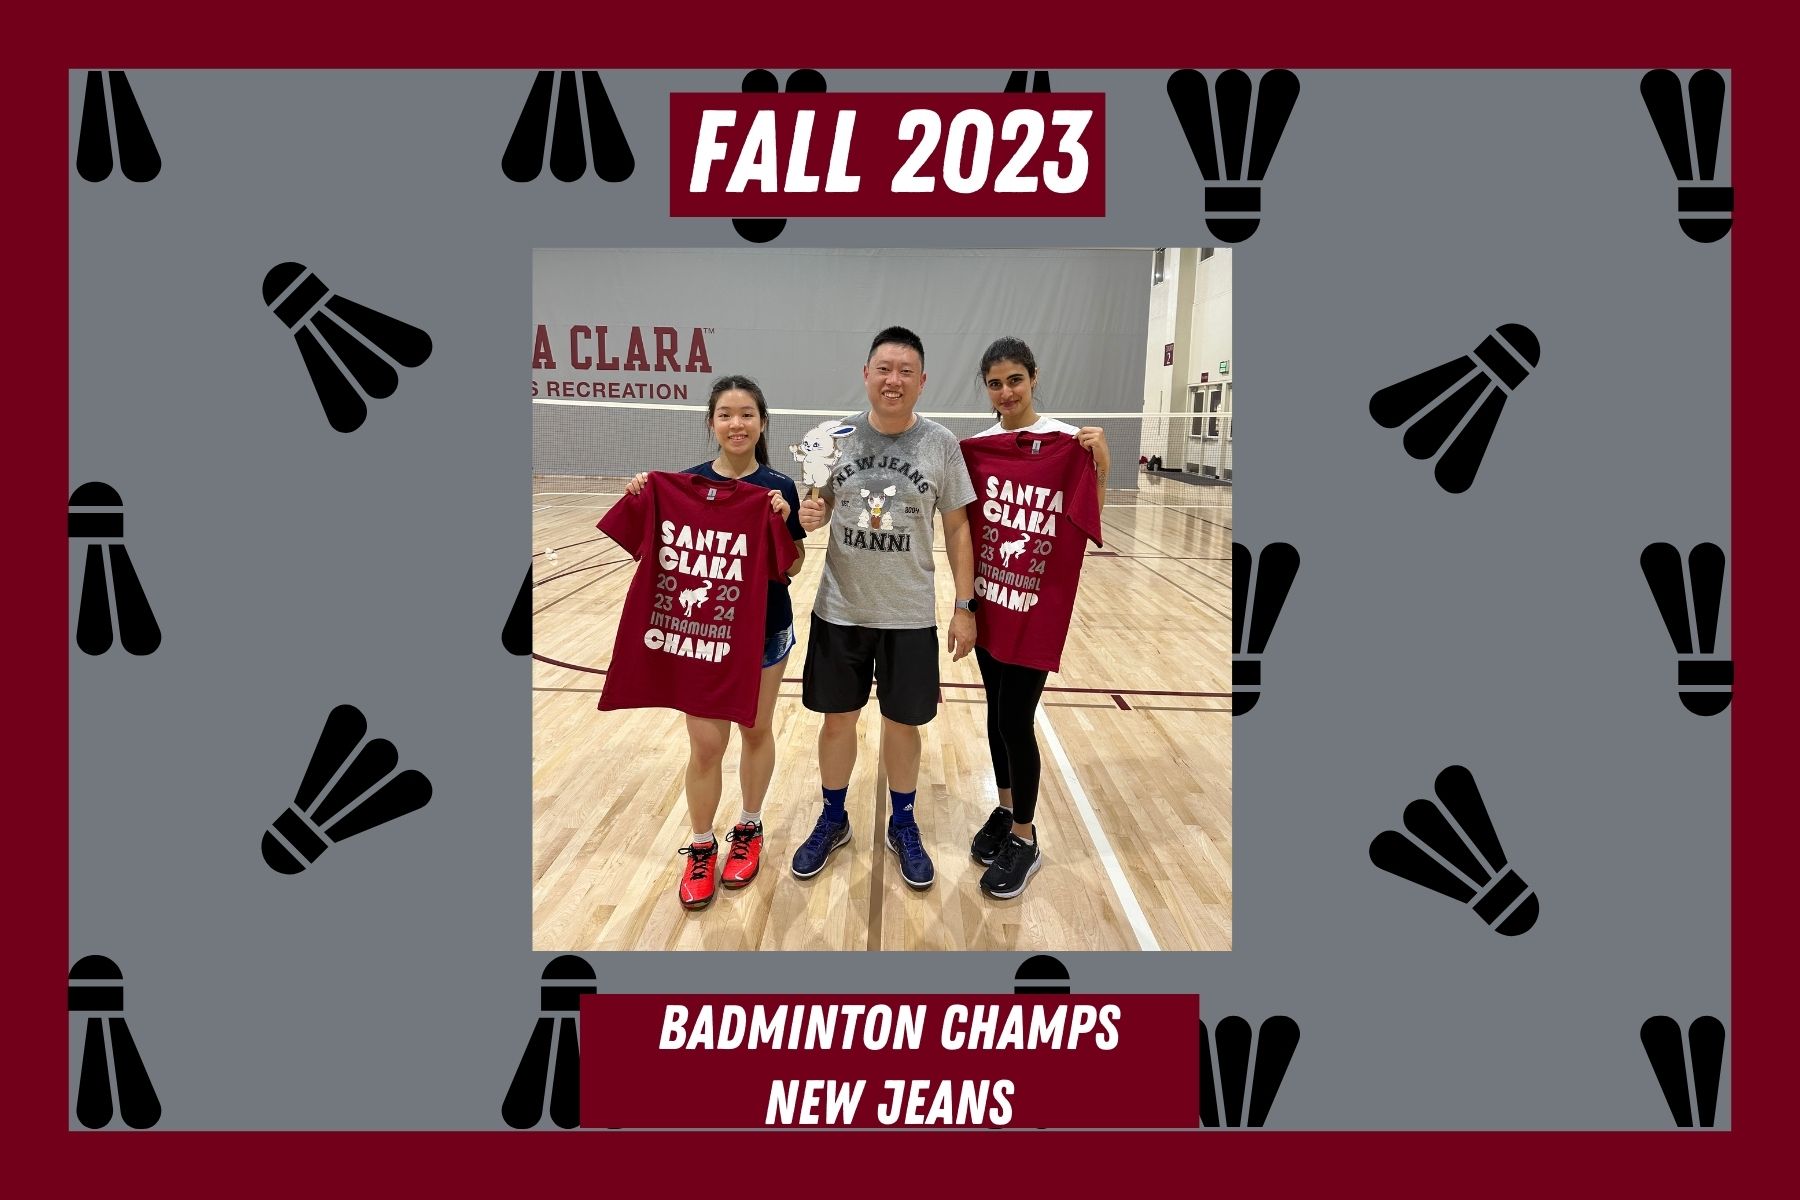 Photo of IM fall 23 IM Badminton champs, New Jeans, posing with their IM champ t shirts